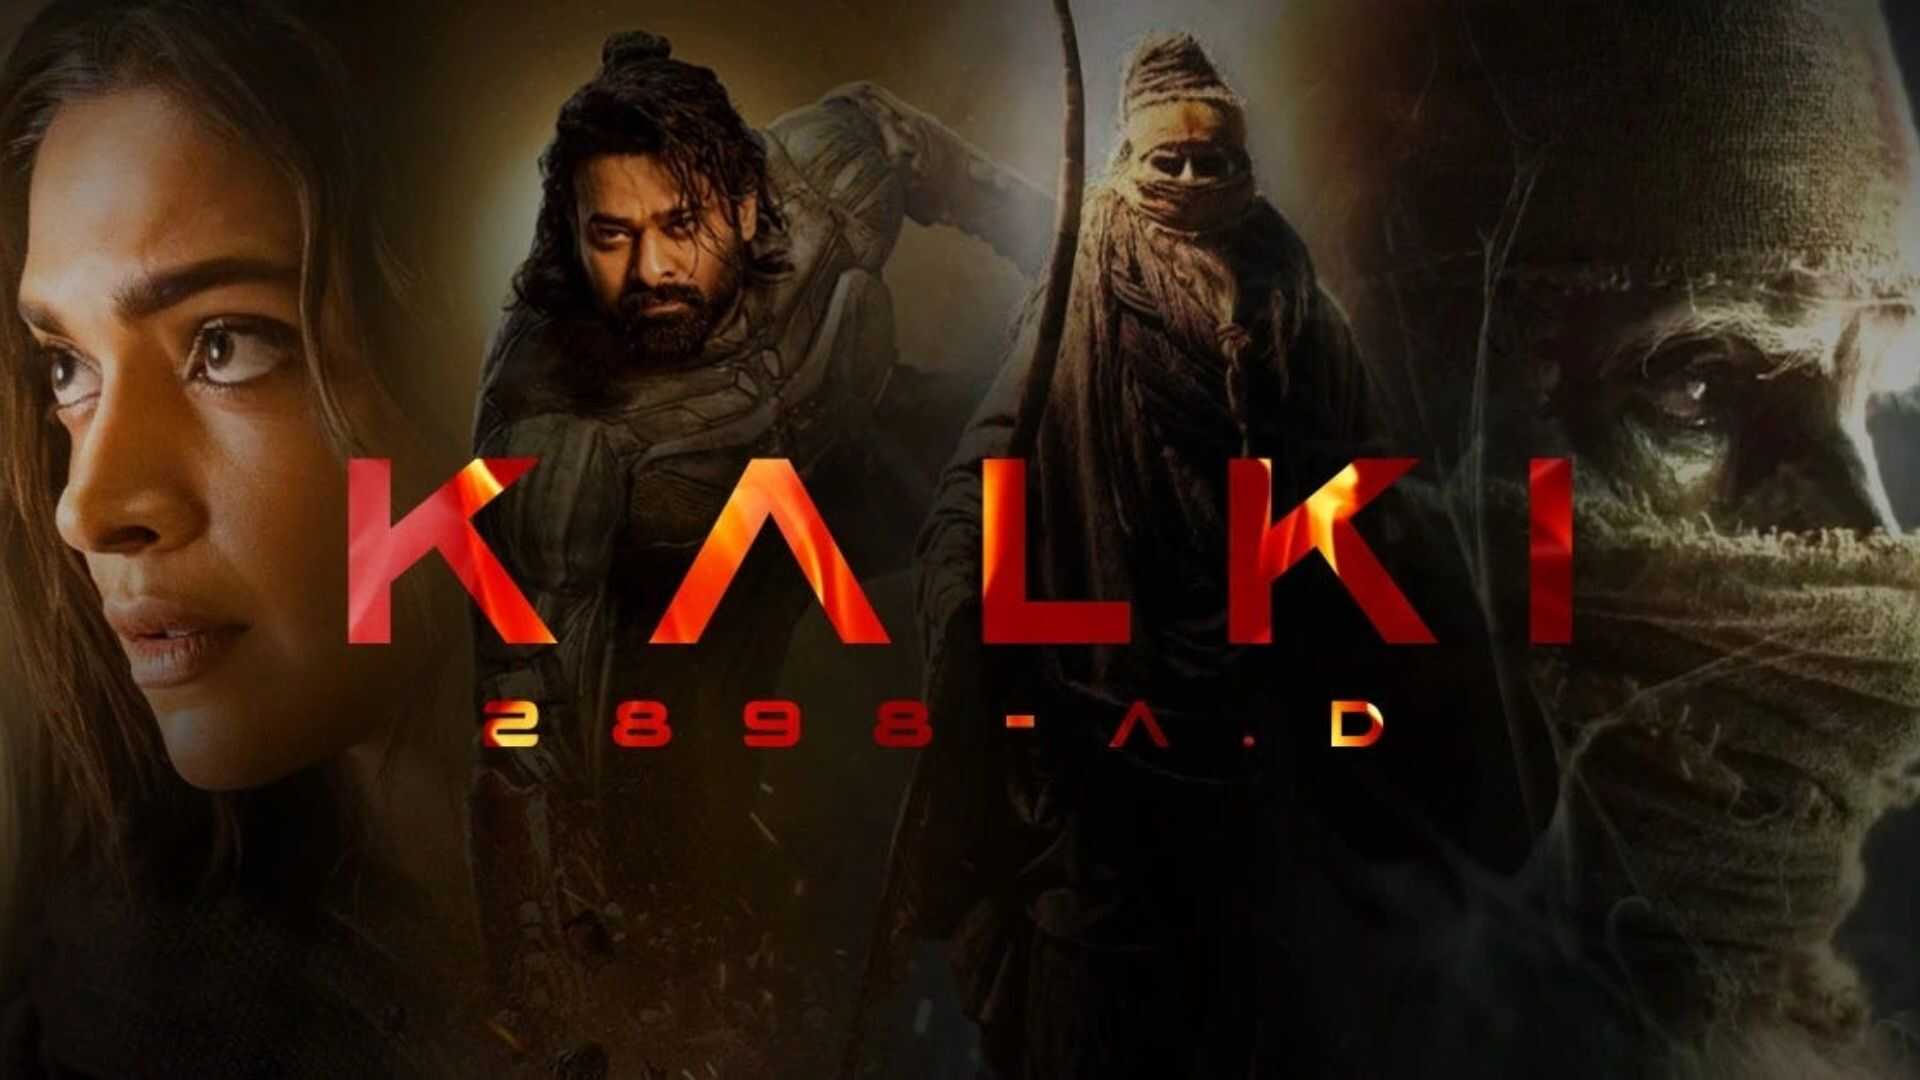 ‘Kalki 2898 AD’ Trailer 2: Decoding The Characters And Clues